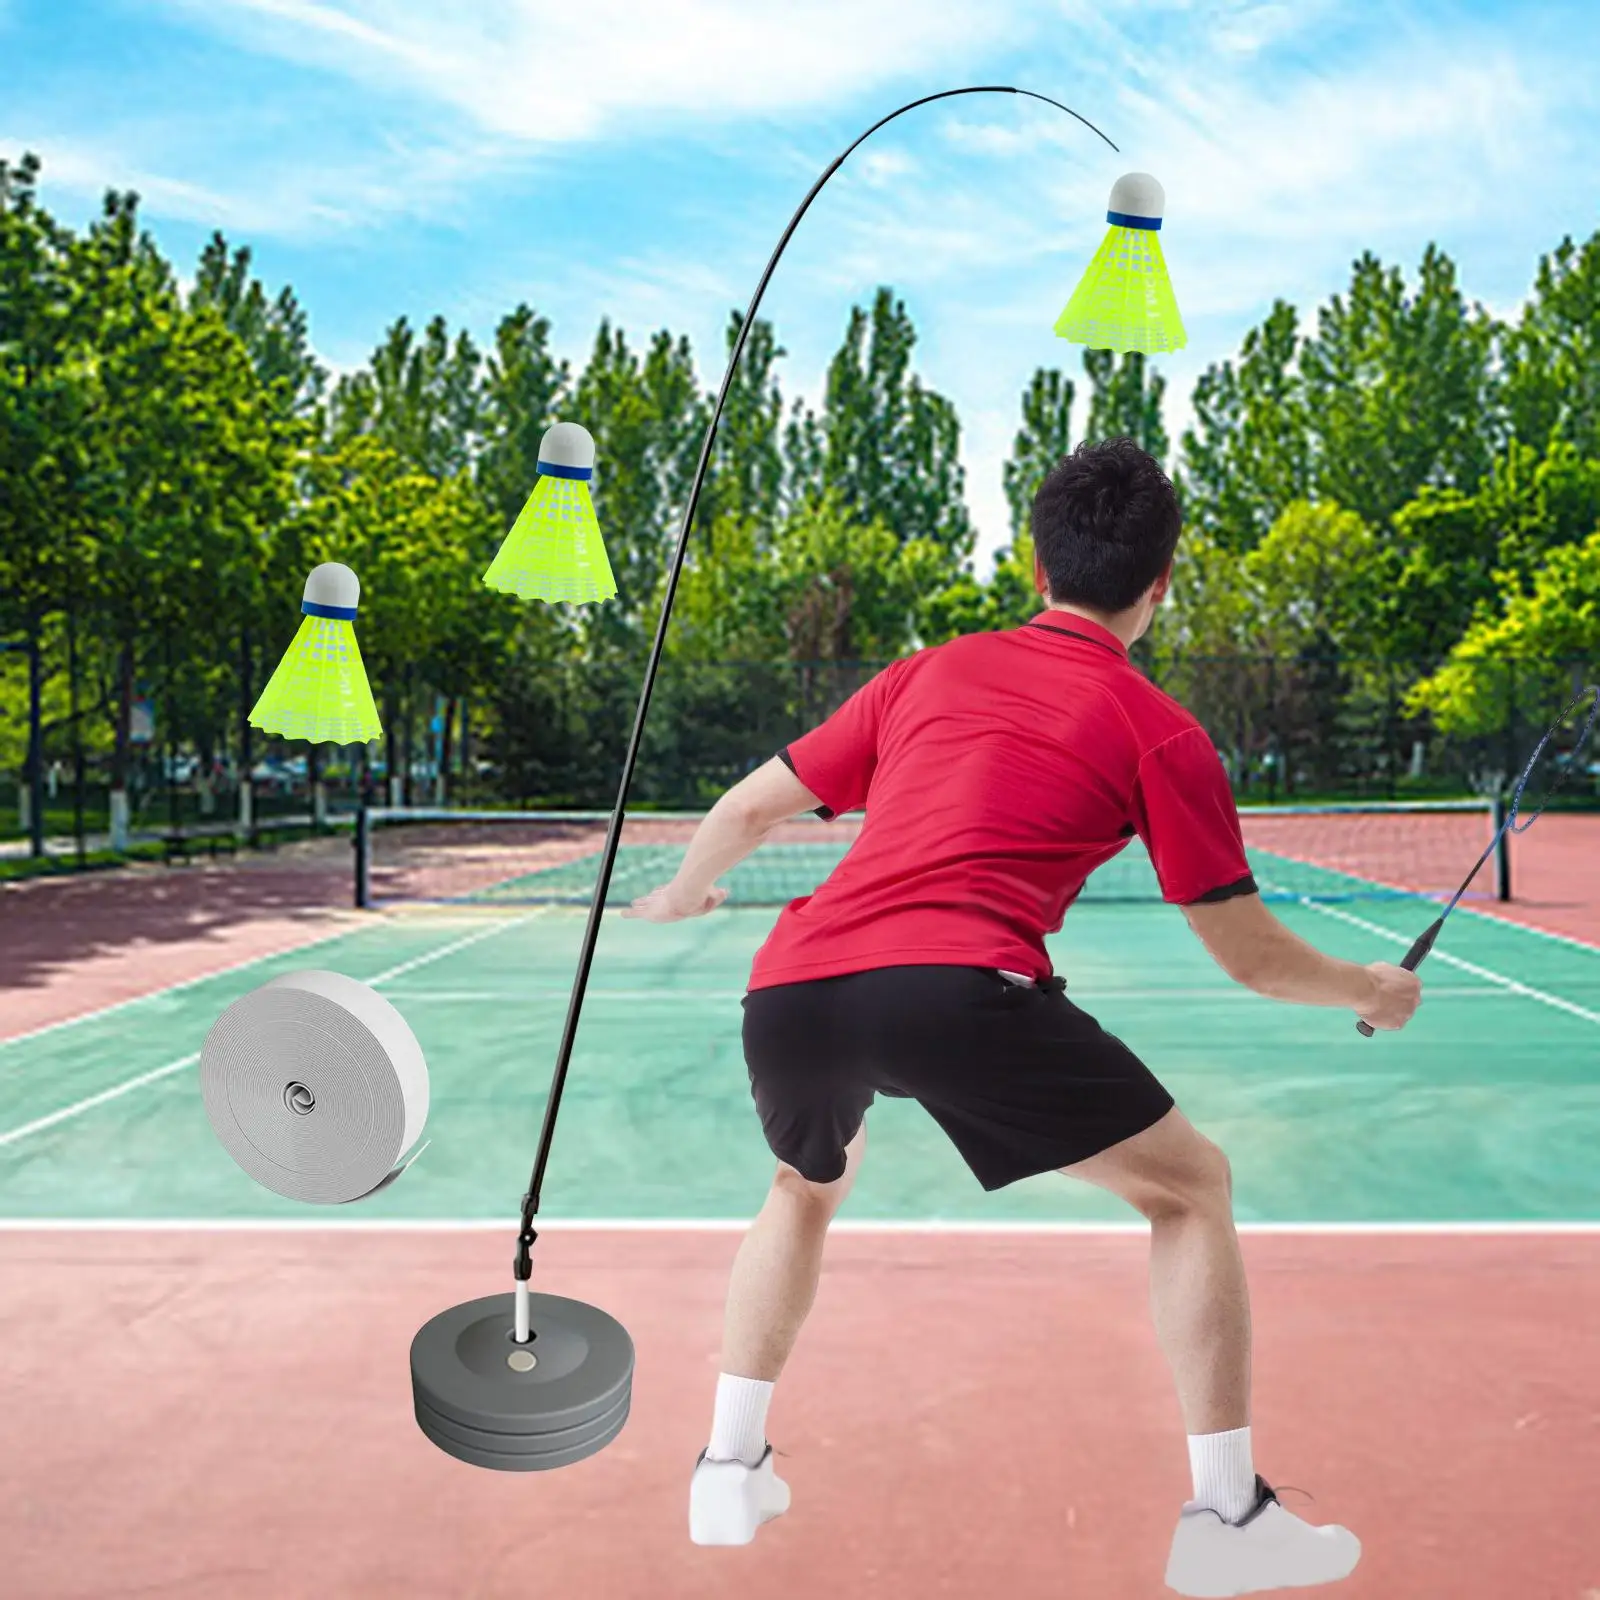 Badminton Solo Exercise Equipment Portable Self Practice Tool Stretchy